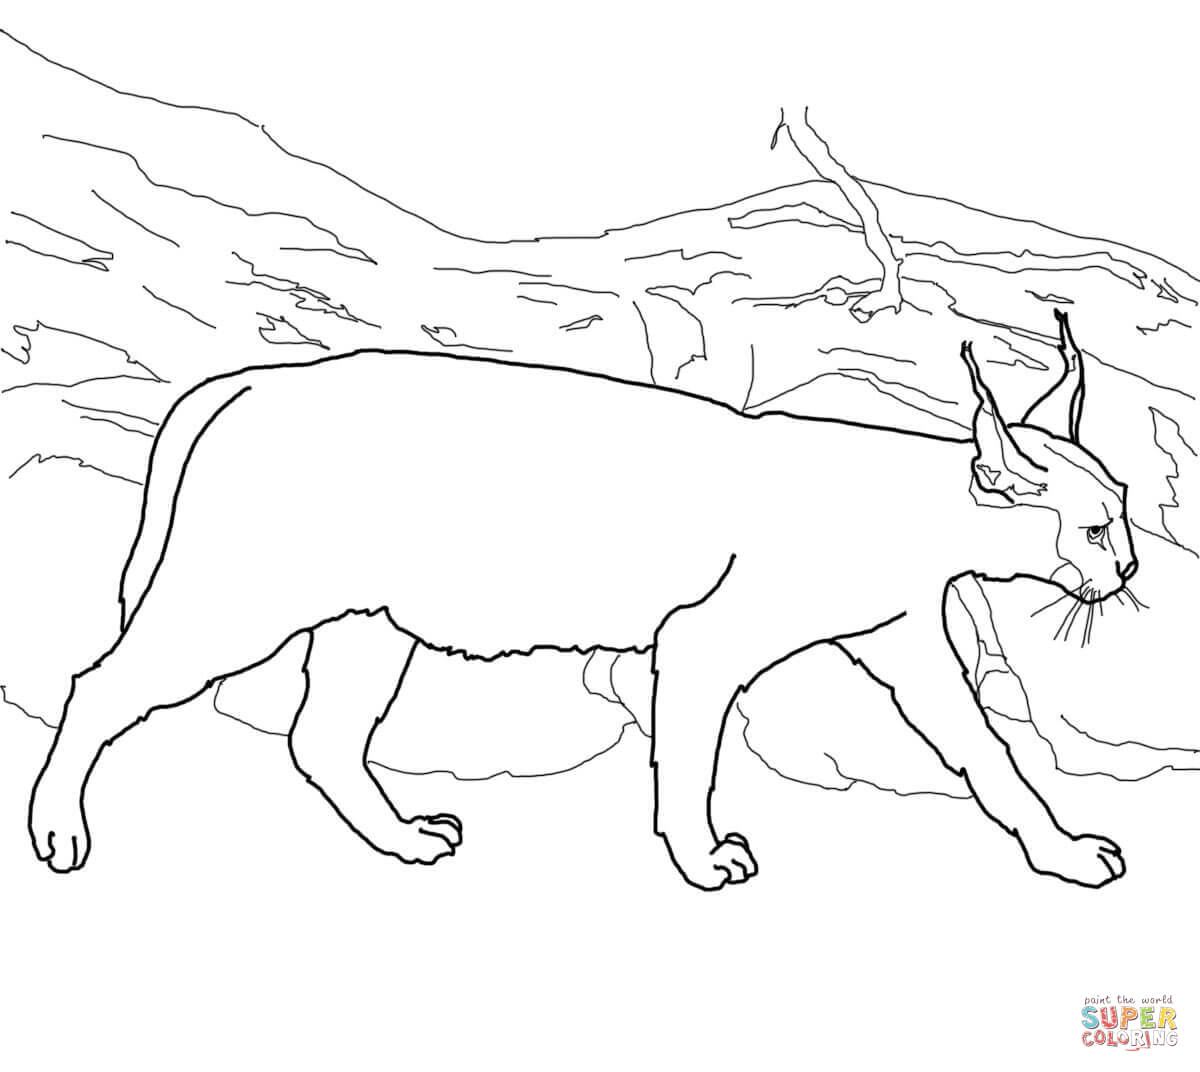 Caracals coloring pages | Free Coloring Pages